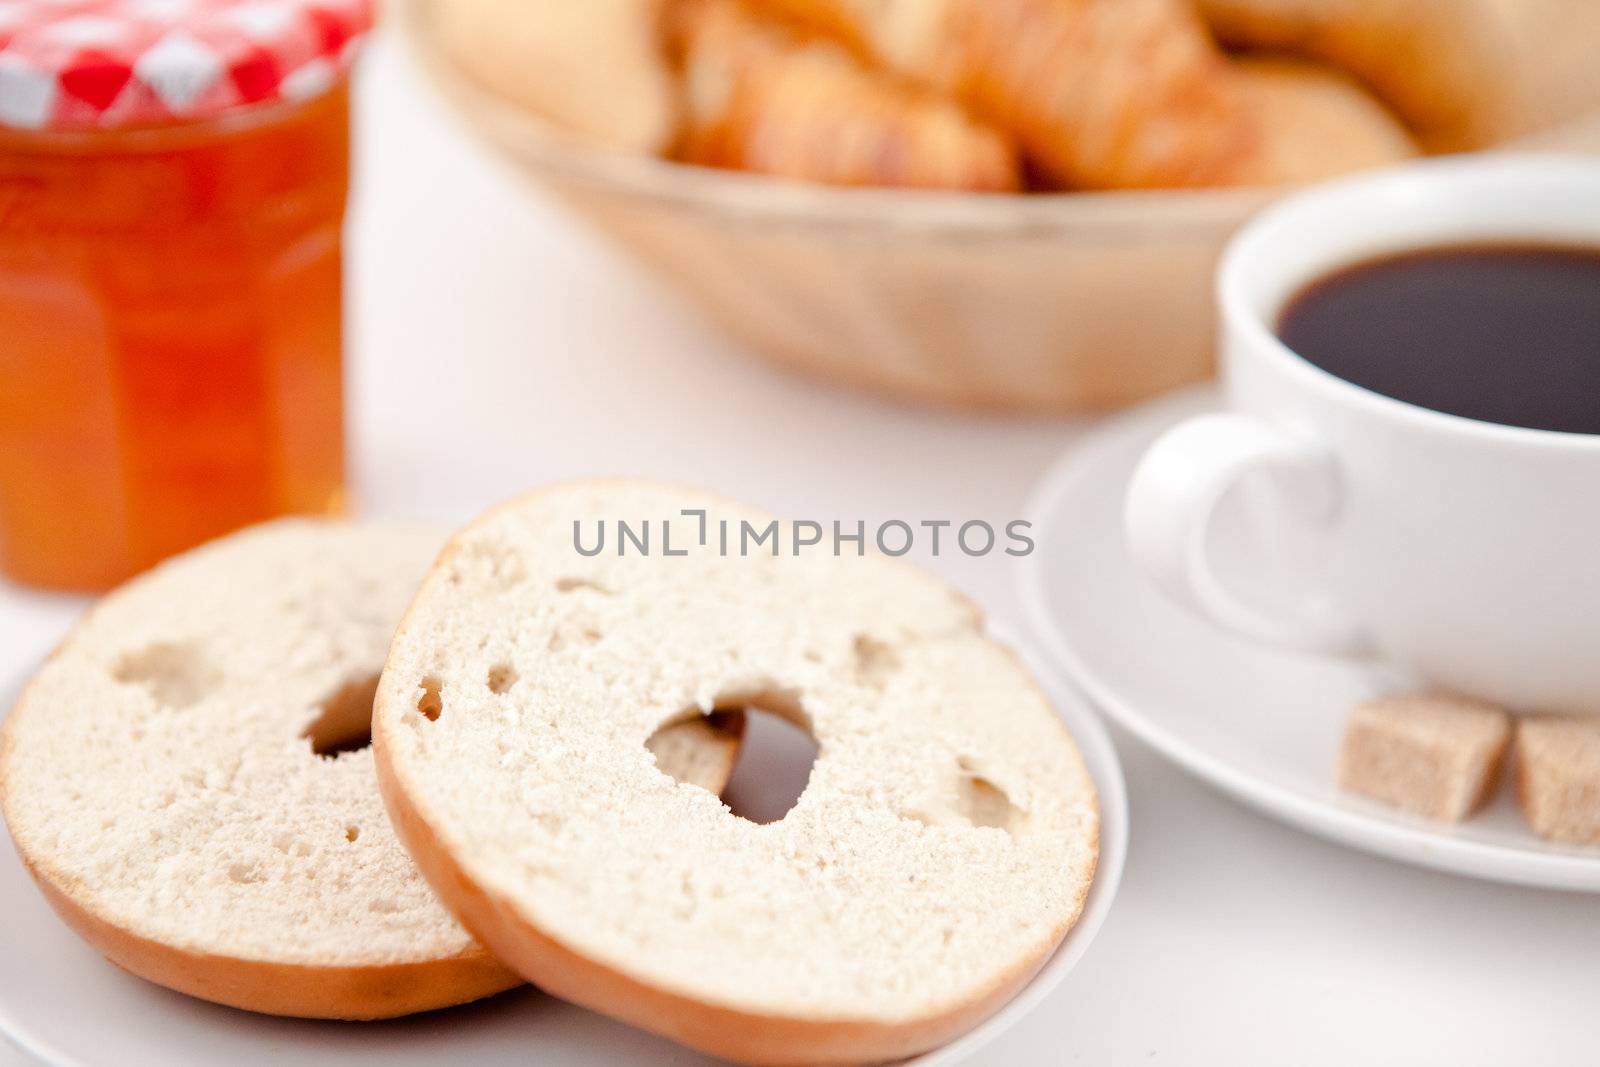 Doughnut cut in half and a cup of coffee on white plates with sugar and milk and a pot of jam against a white background